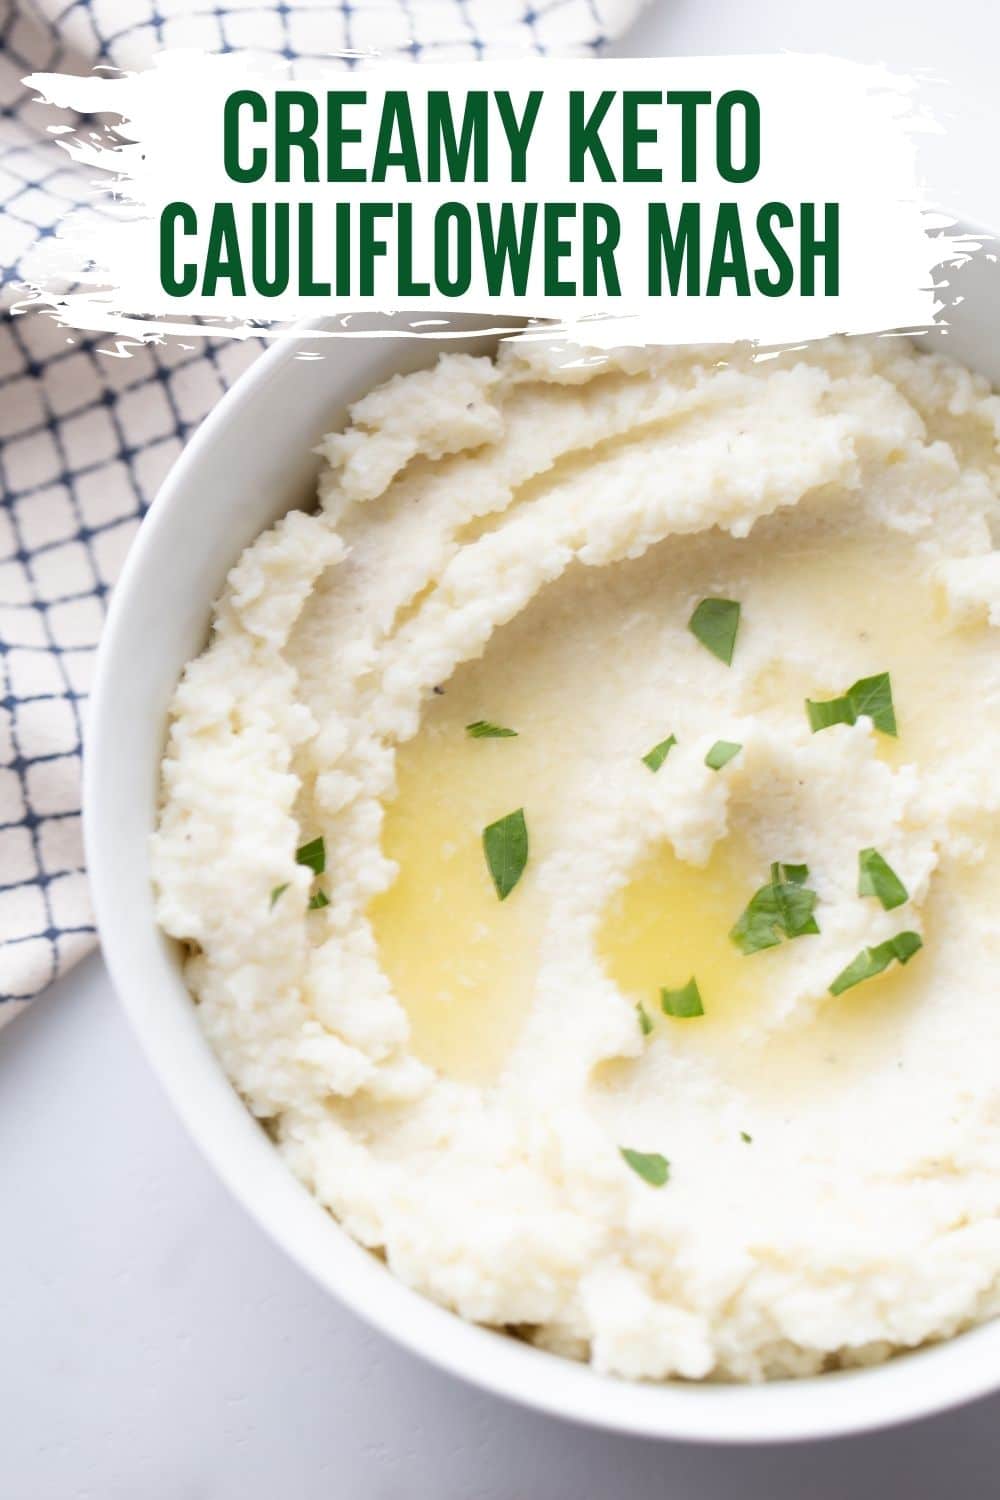 KETO CAULIFLOWER MASH IN A BOWL WITH MELTED BUTTER